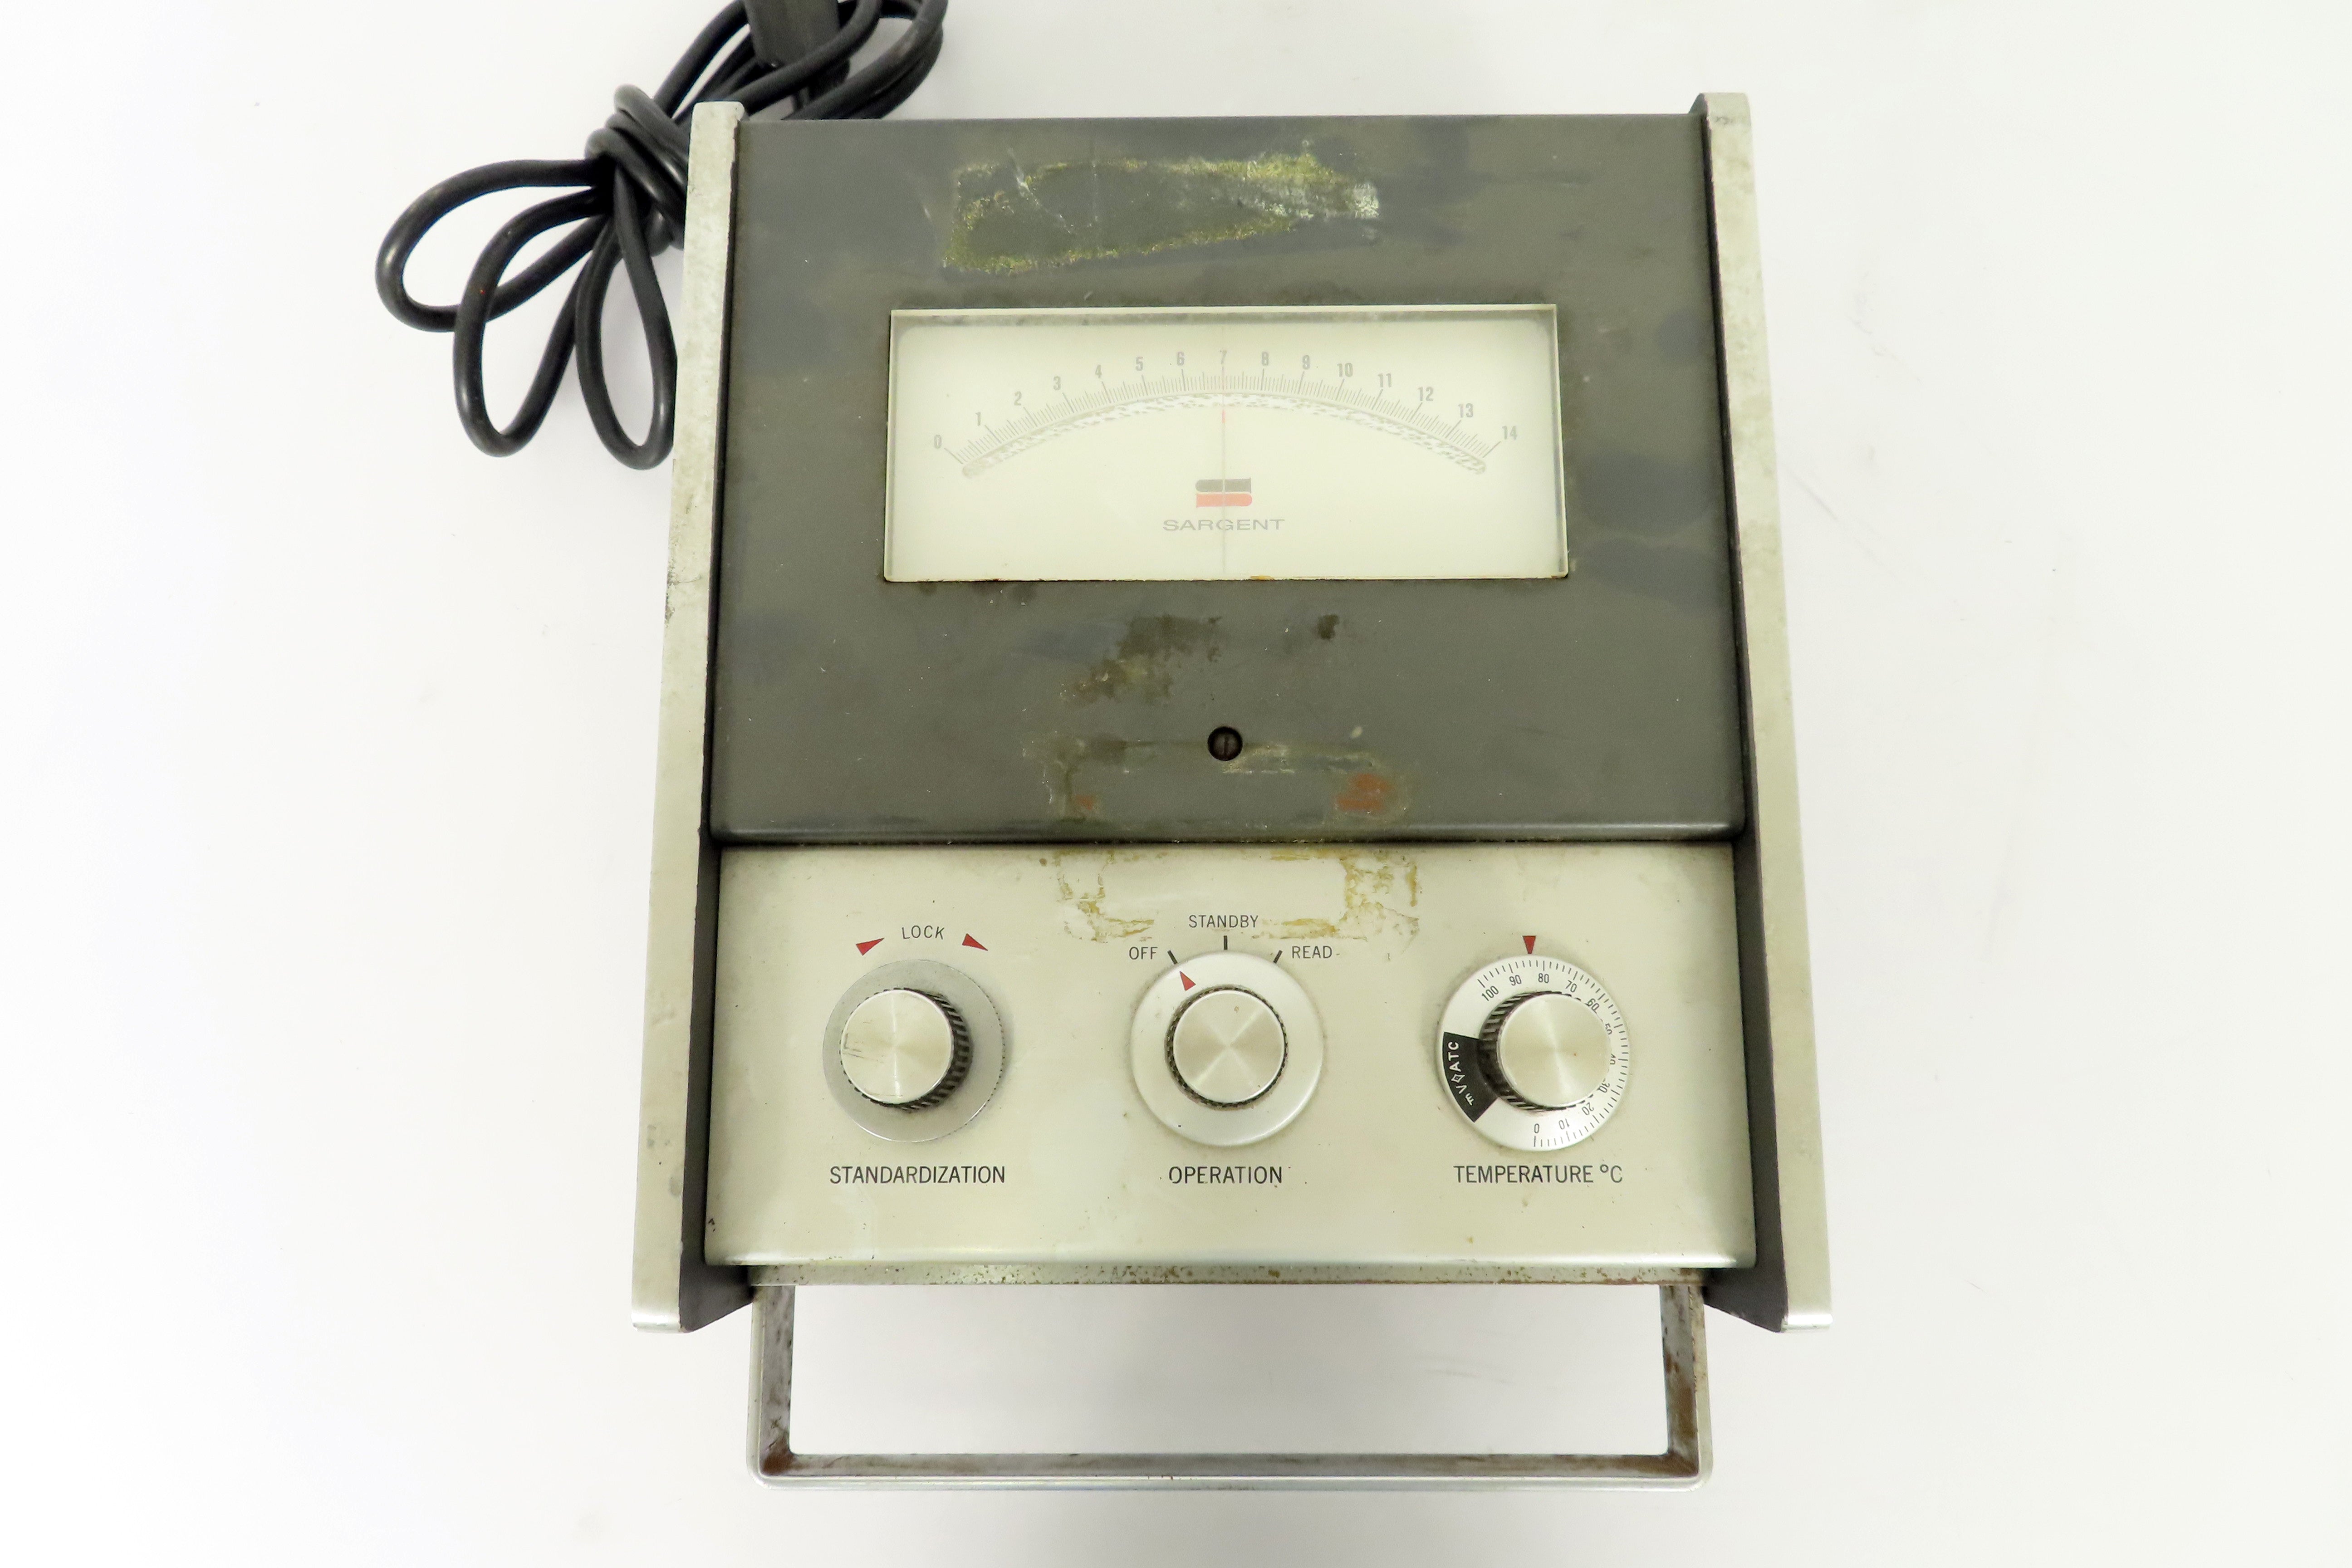 Sargent-Welch Scientific Company S-30007-10 Portable pH Meter